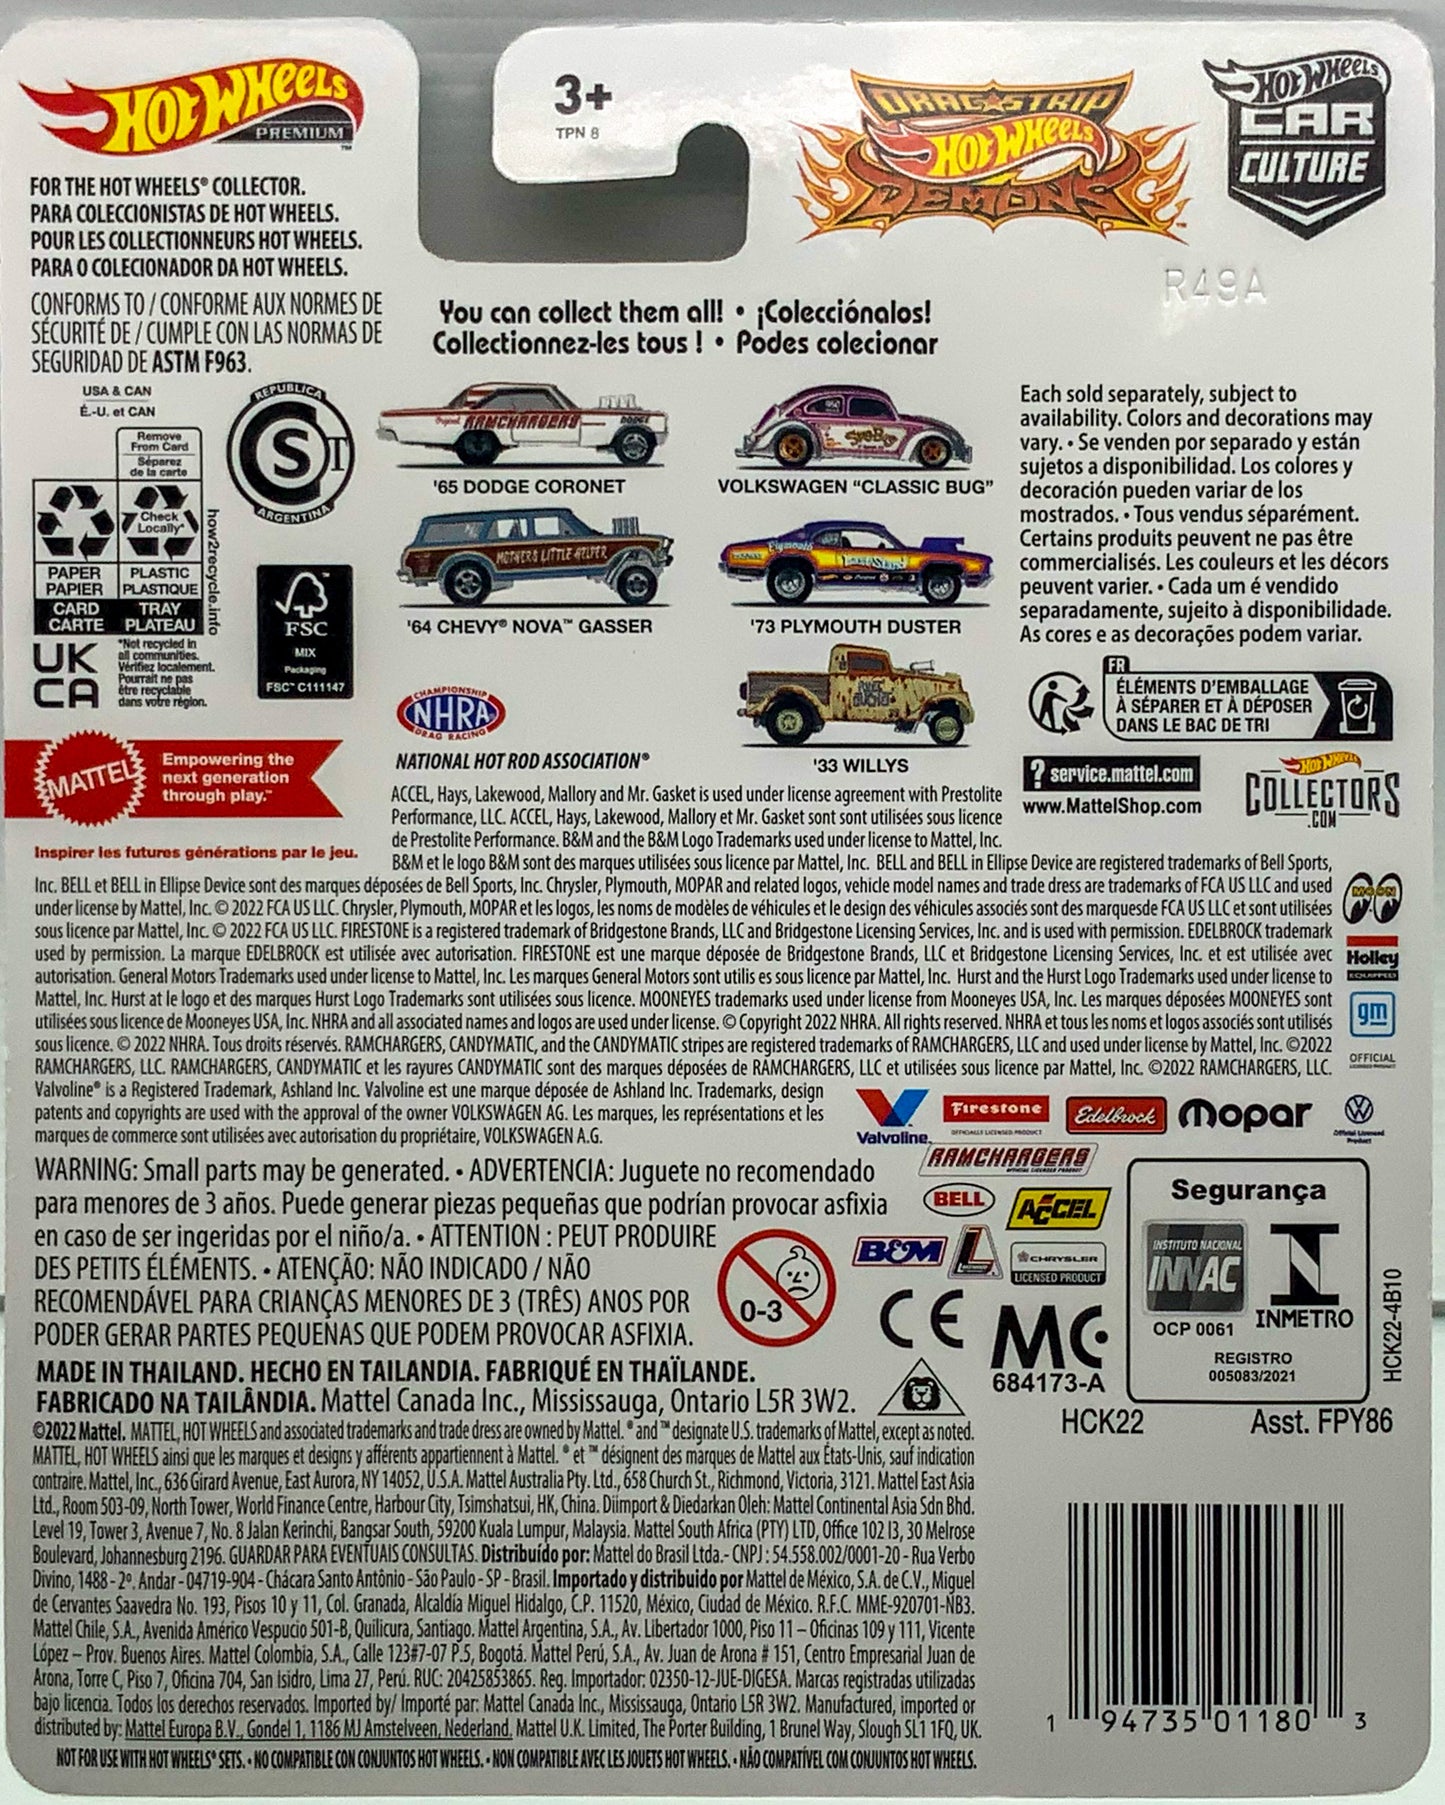 Buy at Tatoyshop.com Products Direct from Shipper Manufacturer Box Made in Thailand Hot Wheels Cars Toys Mattel FPY86 00887961619805   Buy at www.tatoyshop.com Back of the Card shows the 5 Cars on the Series  '65 Dodge Coronet A/FX 1/5 Volkswagen "Classic Bug" 2/5 '64 Chevy Nova Wagon Gasser 3/5 '73 Plymouth Duster 4/5 '33 Willys 5/5